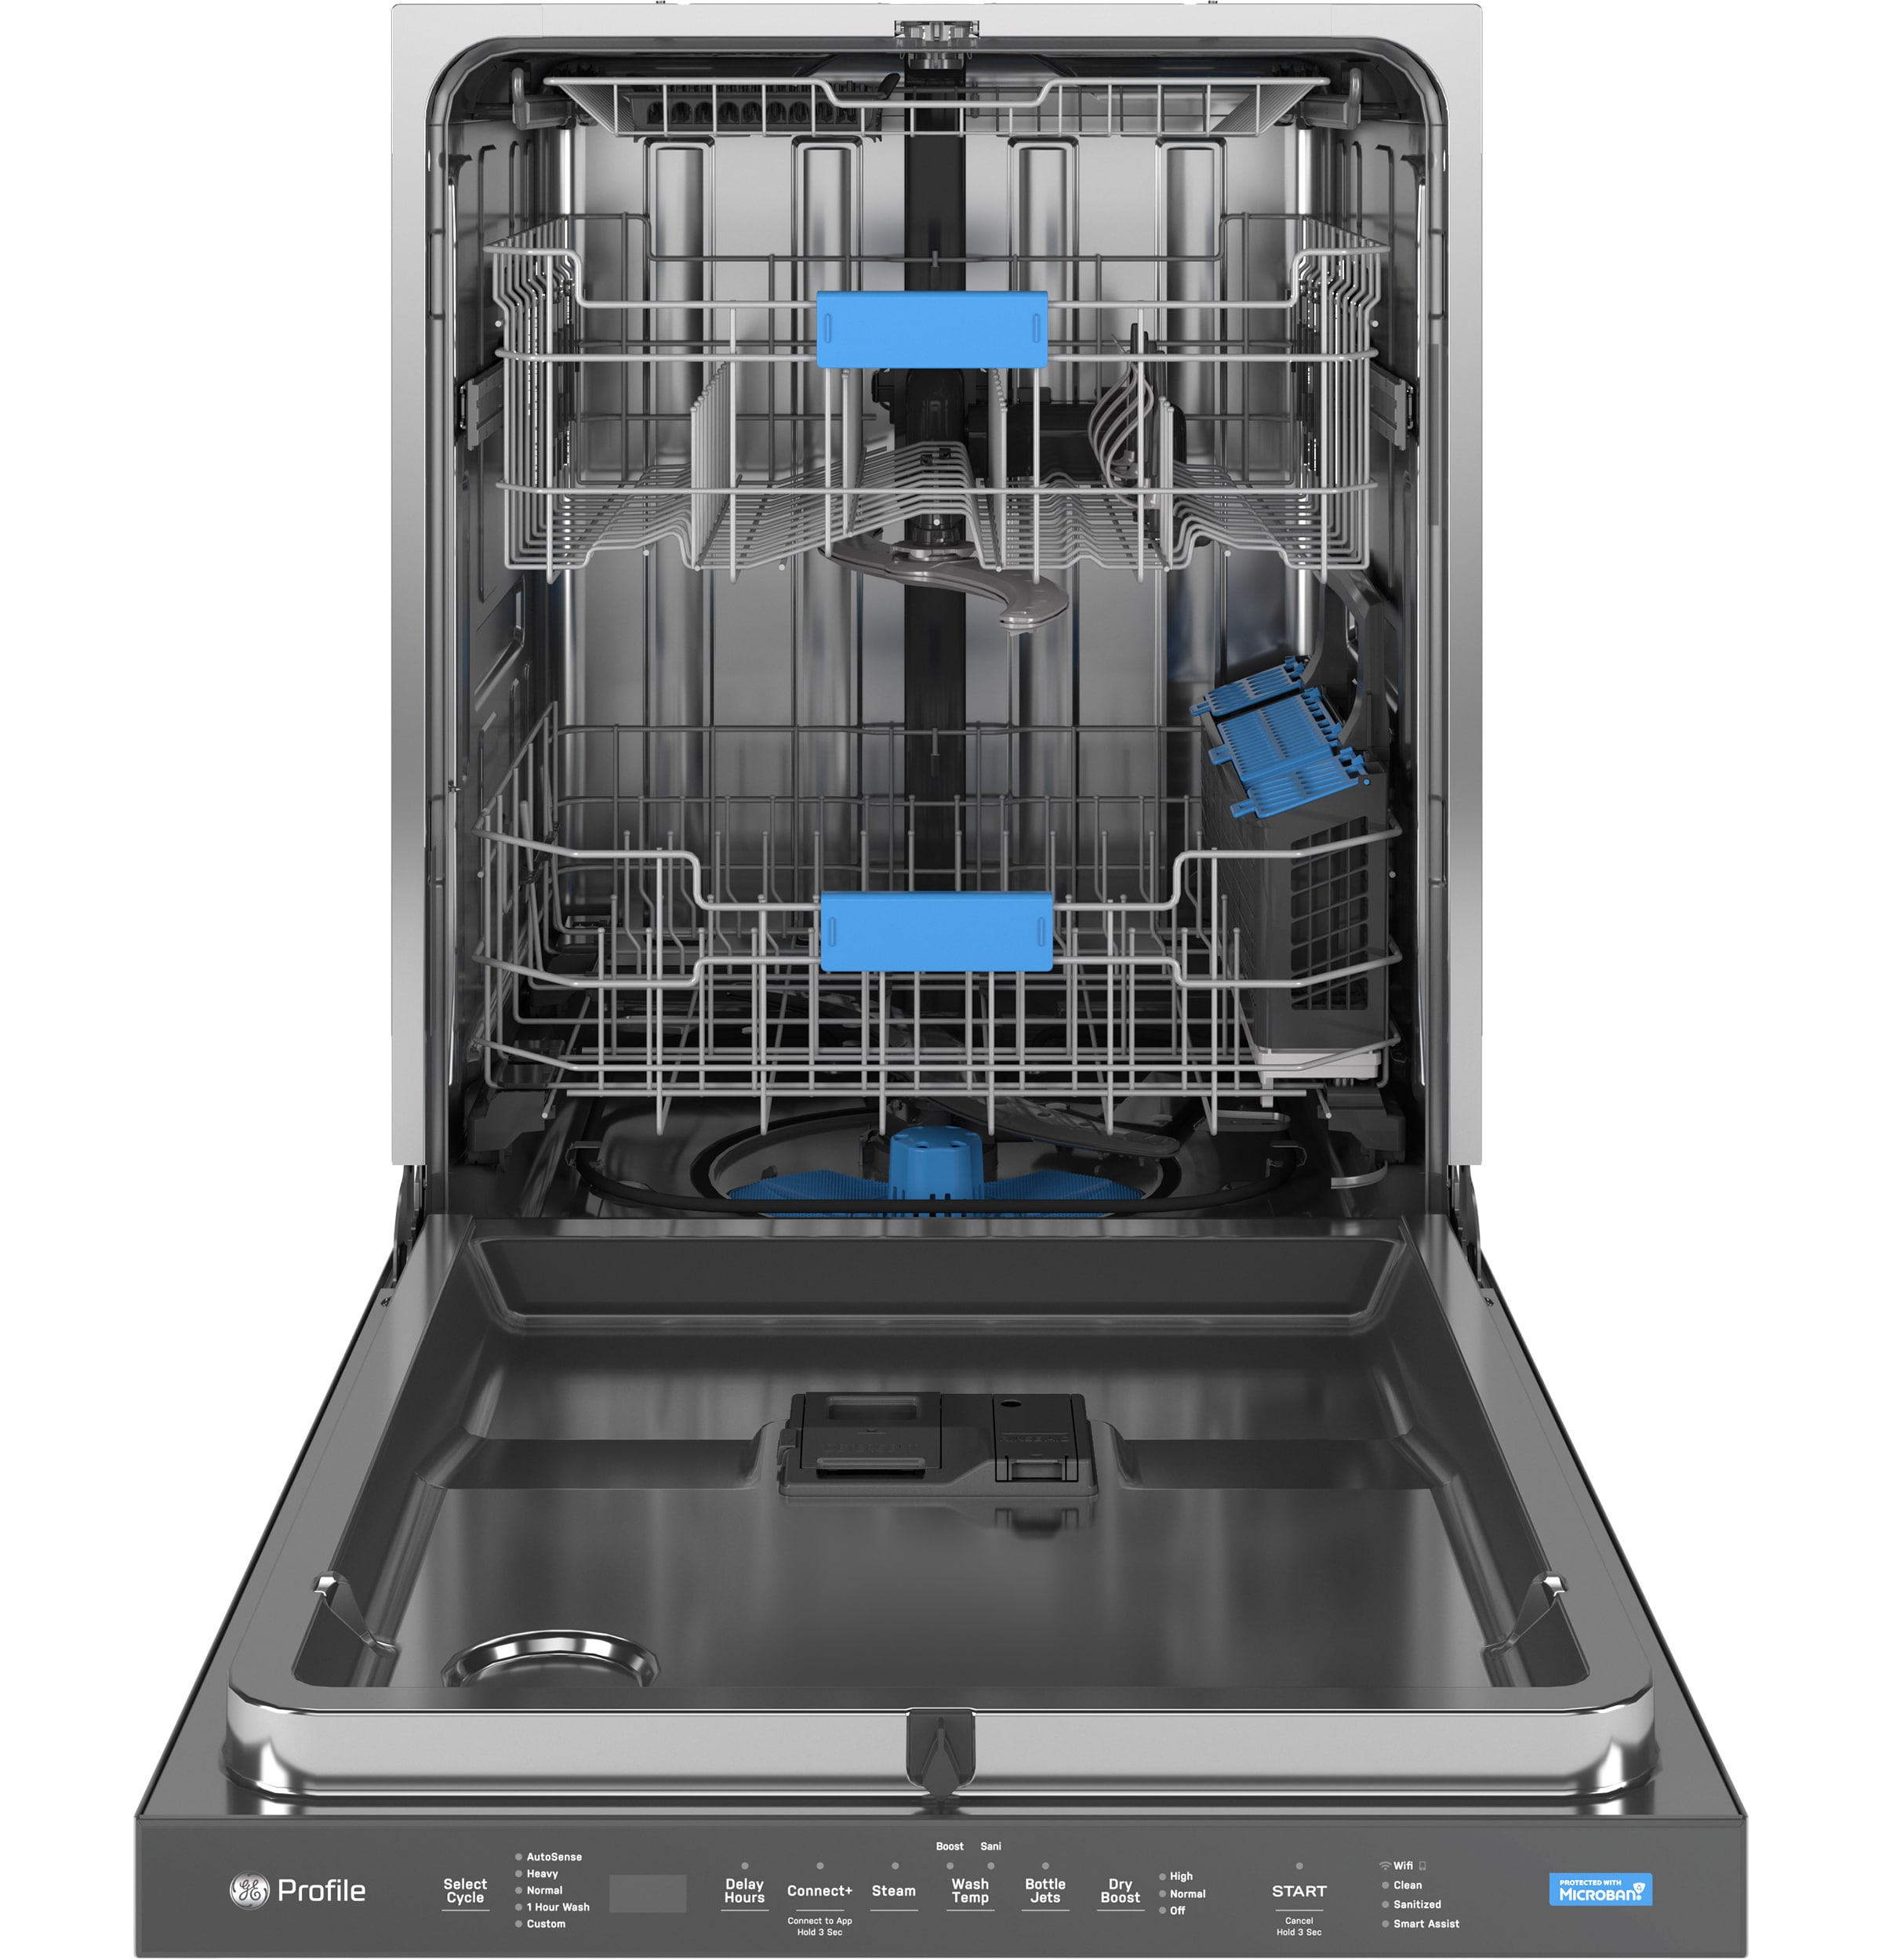 Dishwasher Insulation: How to Soundproof a Noisy Dishwasher in 8